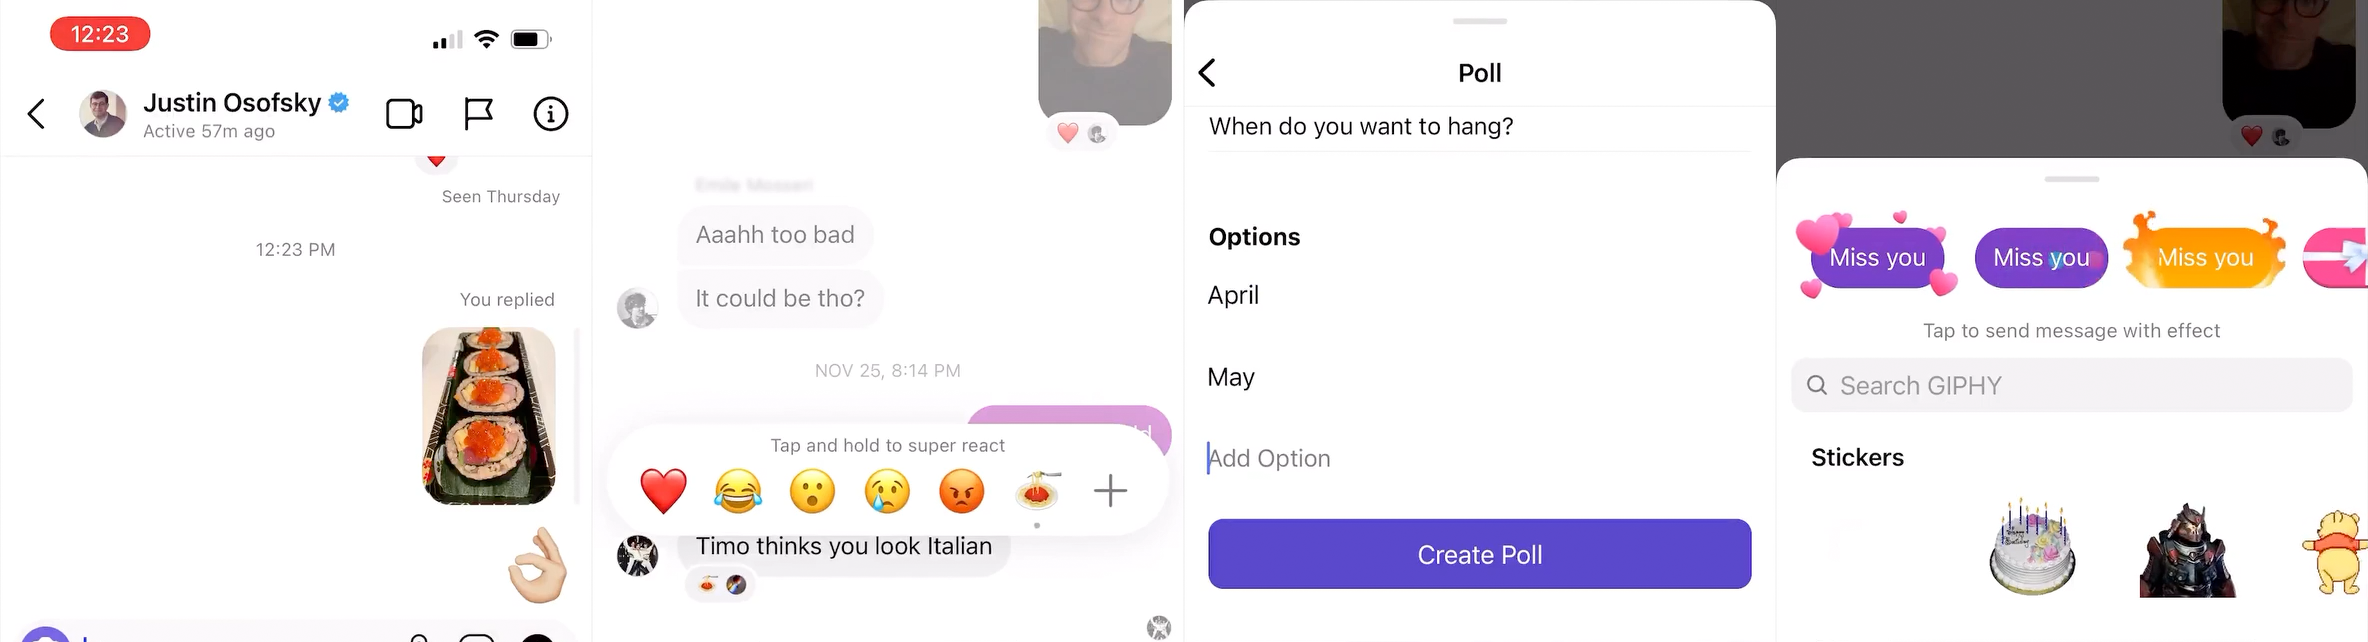 Four new features available on Messenger